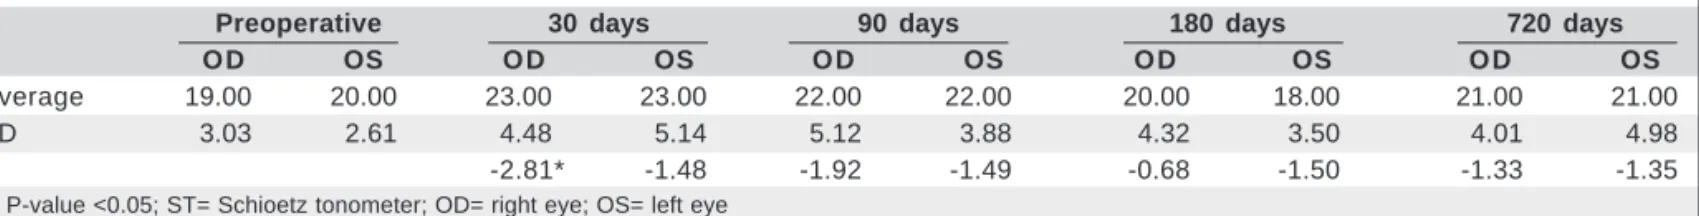 Table 2. Pre and postoperative IOP values by ST (at 30, 90, 180 and 720 days) of eyes that underwent LASIK